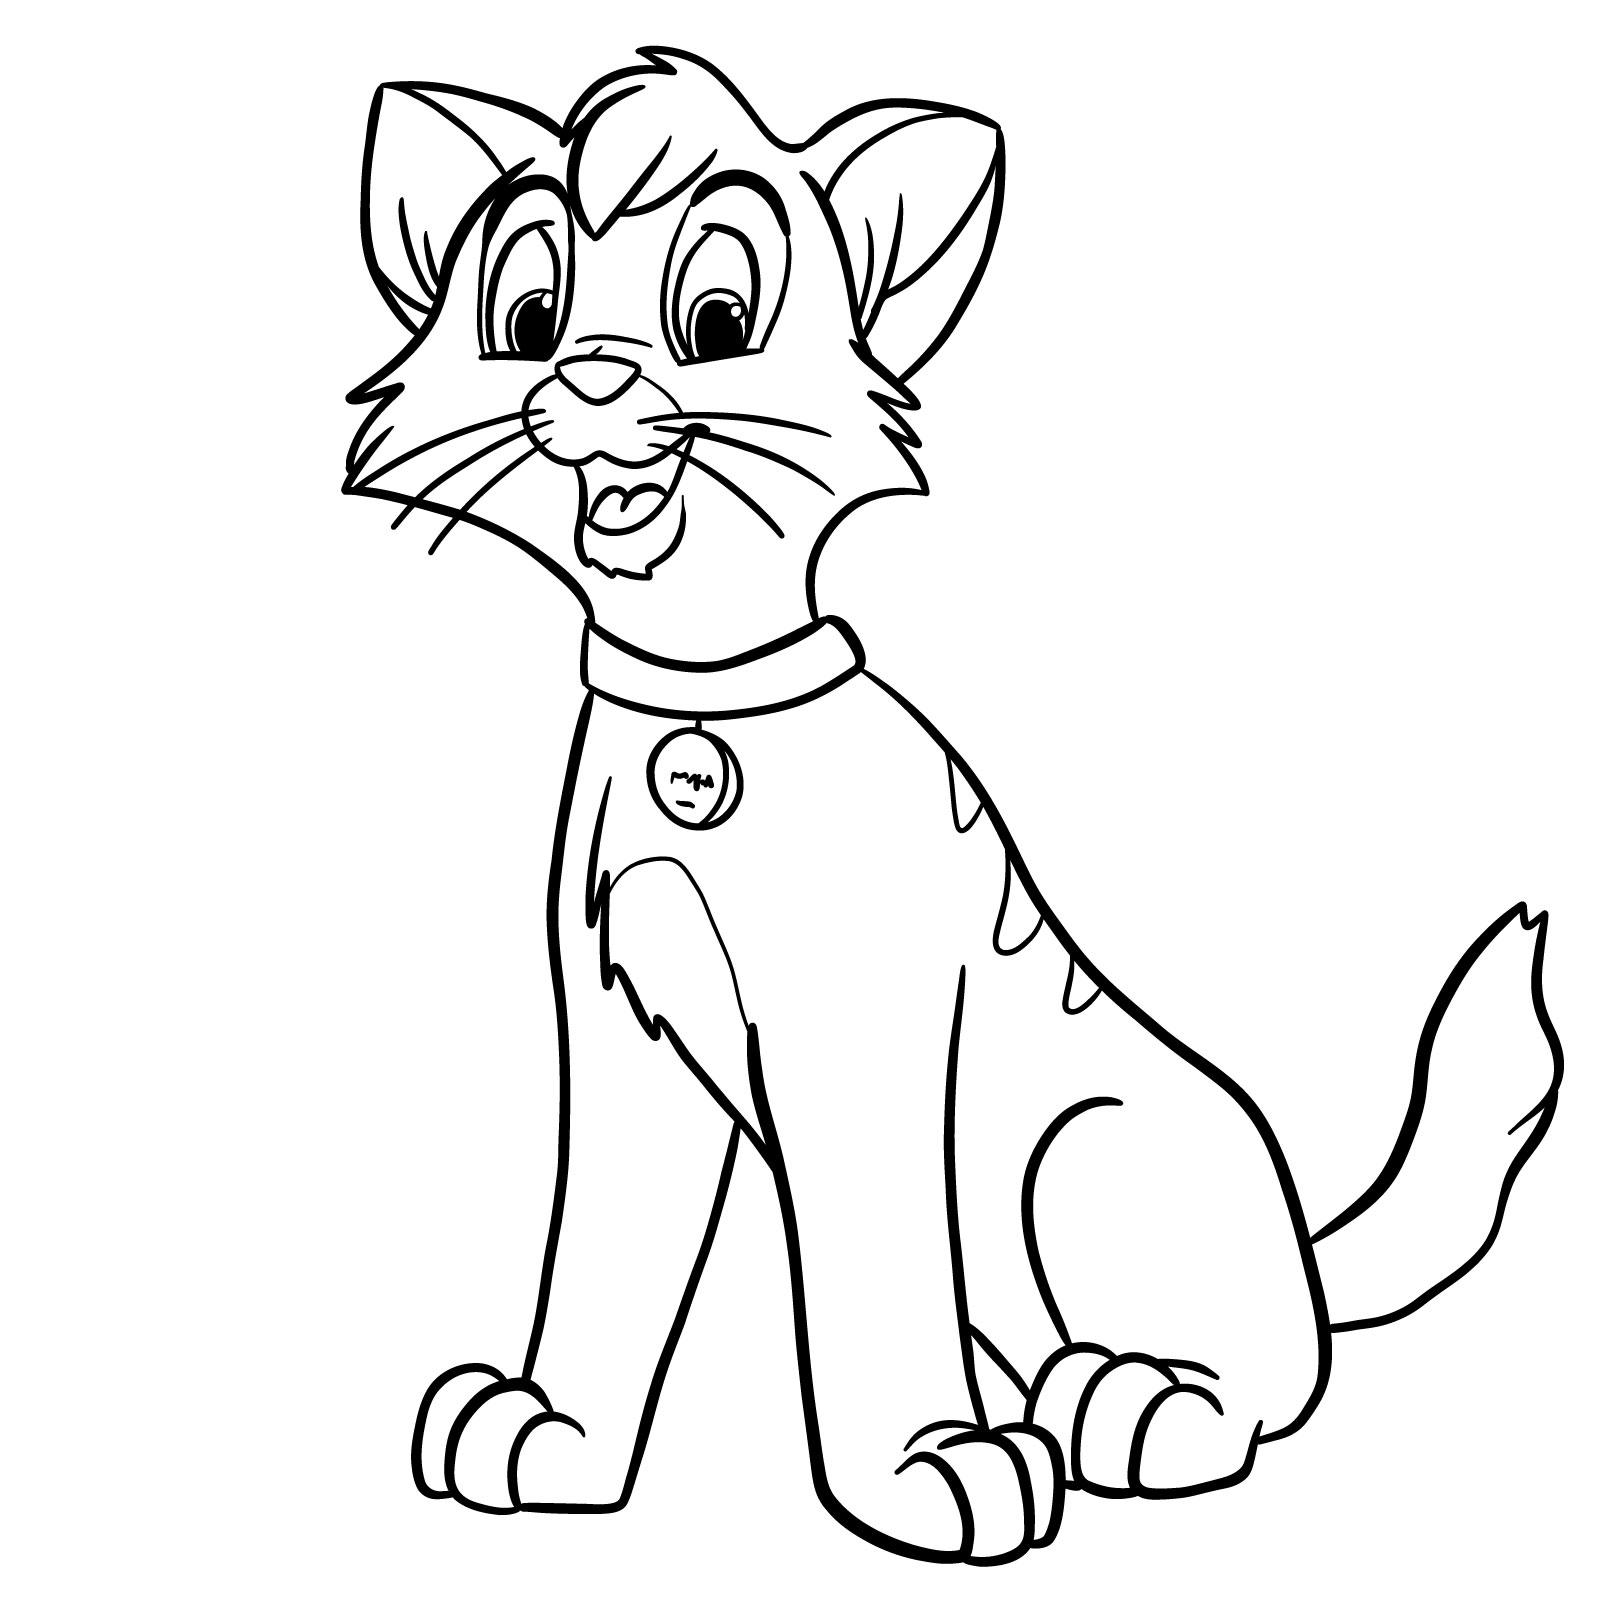 How to draw Oliver (Oliver & Company) - coloring